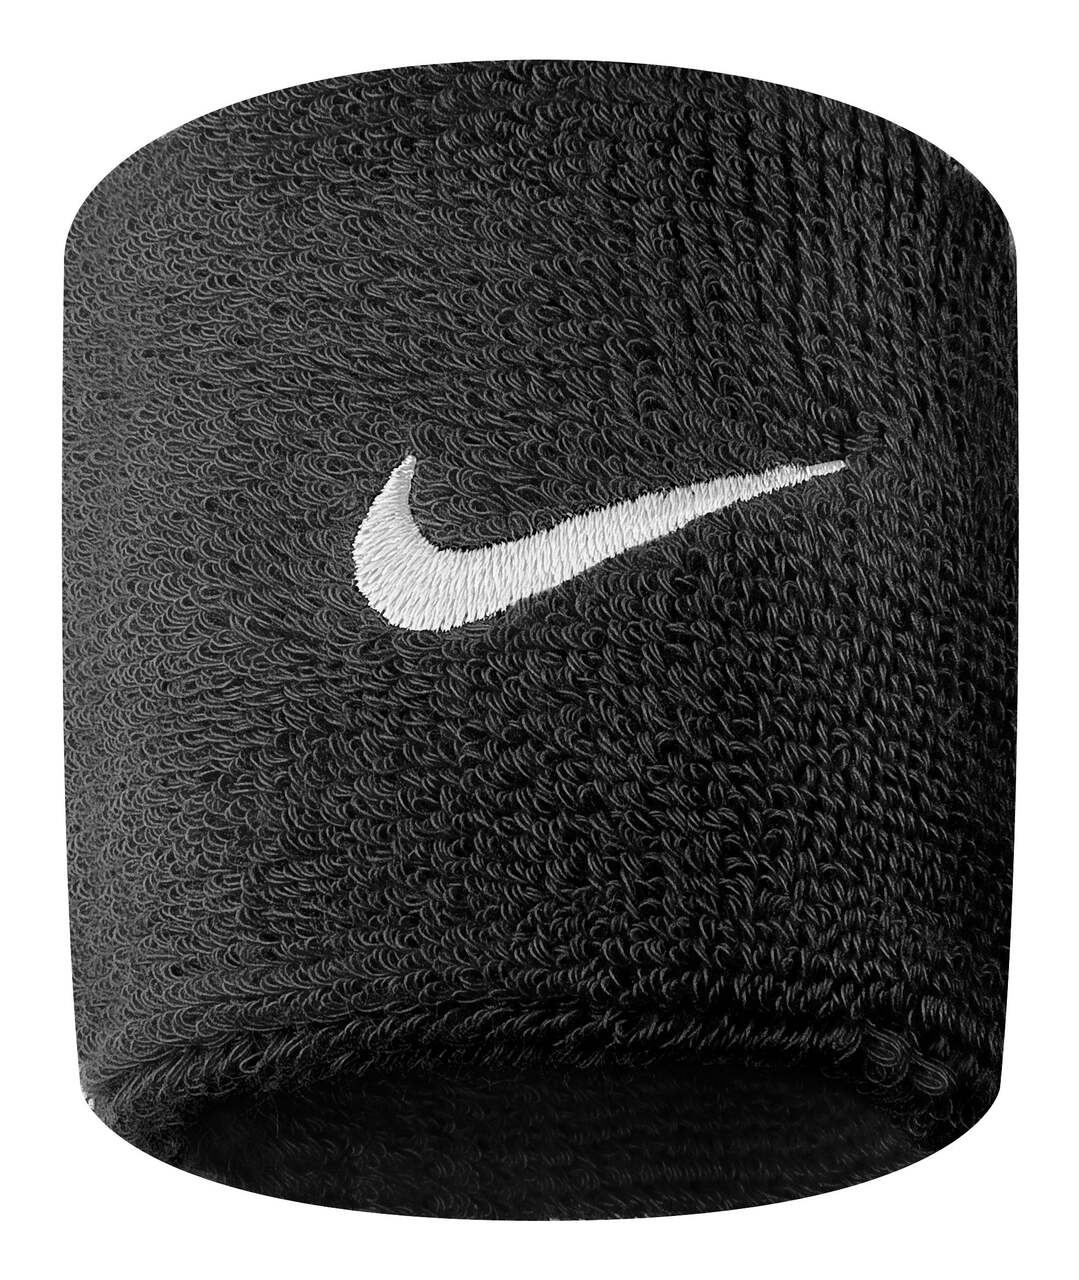 https://media-www.canadiantire.ca/product/playing/team-sports-and-golf/sports-equipment-accessories/0842989/nike-swoosh-wristband-black-c90c442d-a431-447c-8a50-e4493966629a-jpgrendition.jpg?imdensity=1&imwidth=640&impolicy=mZoom